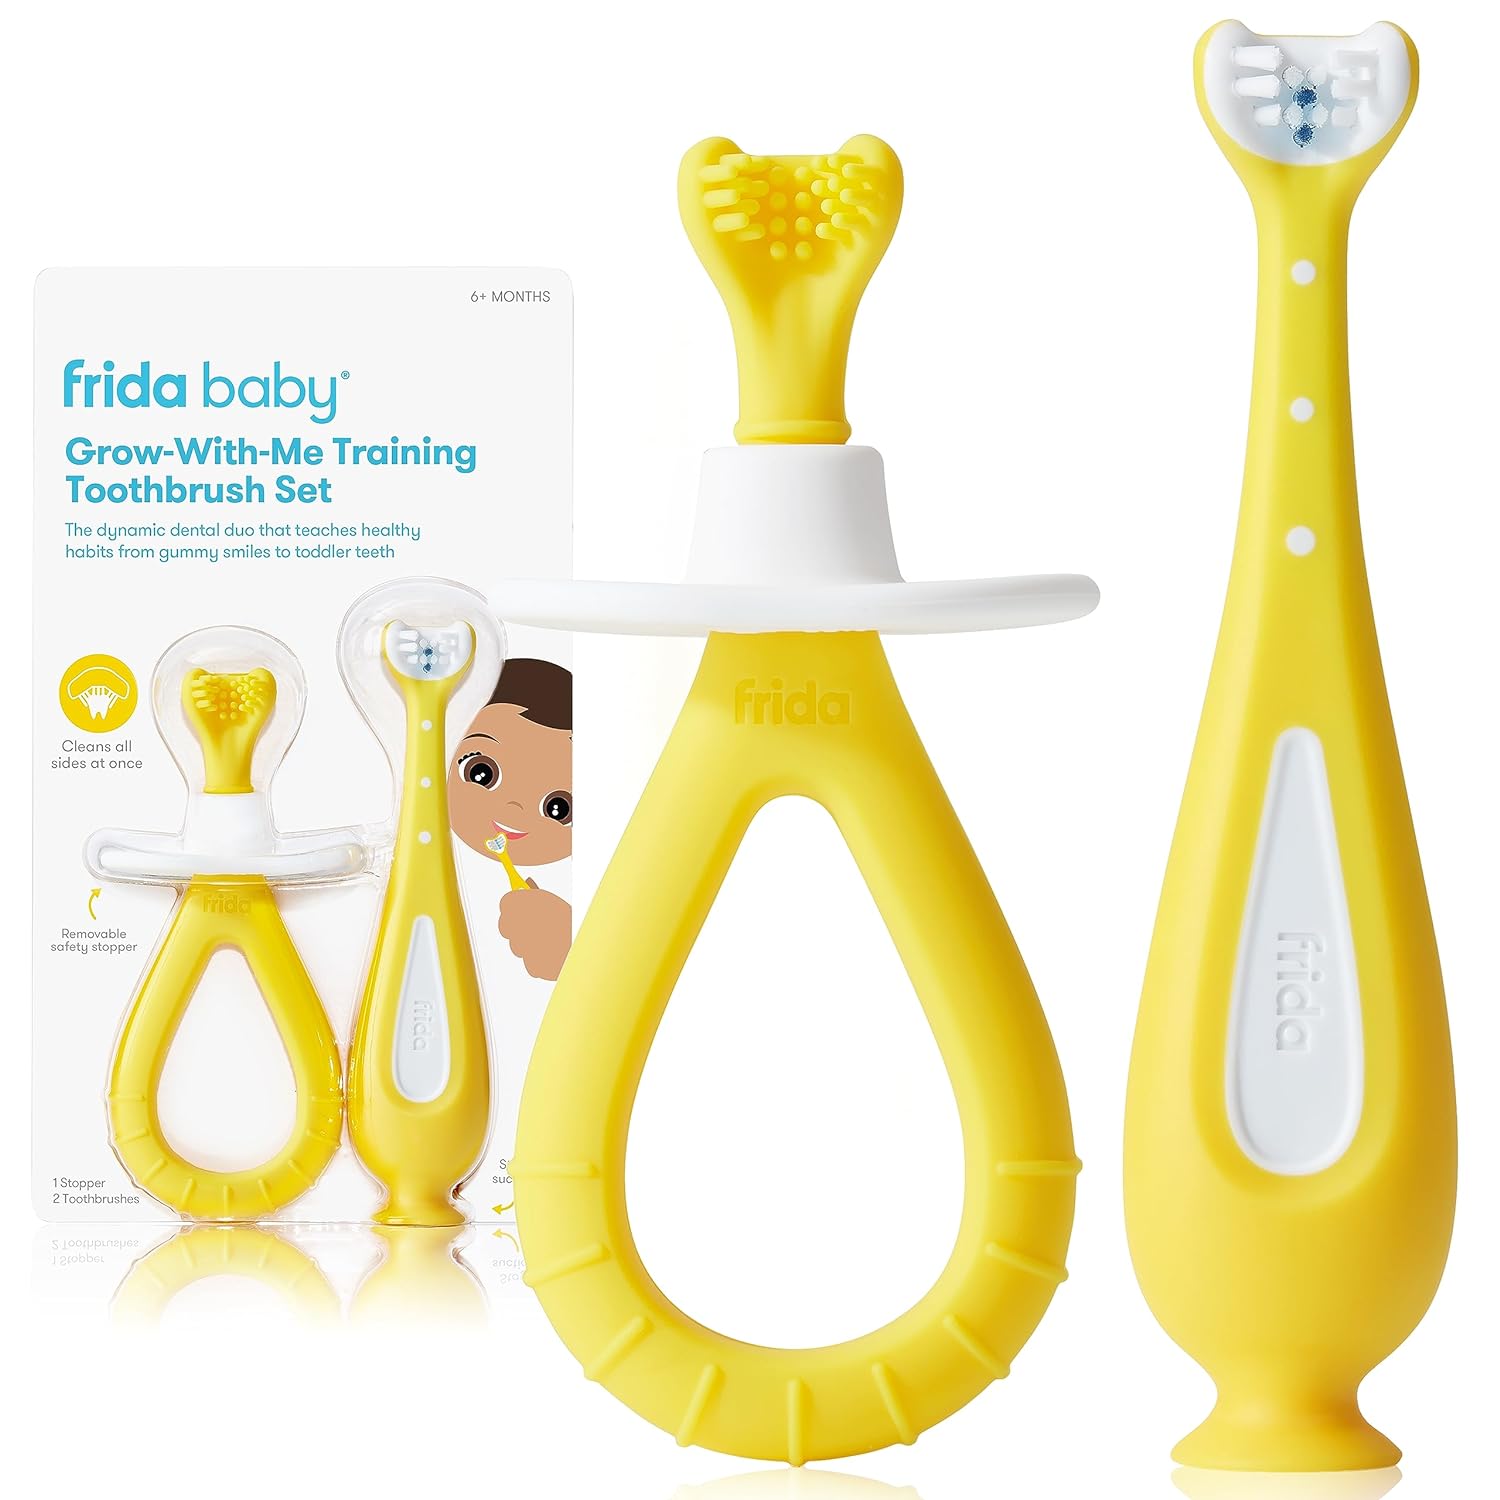 Frida Baby Grow-with-Me Baby Toothbrush Training Set | Infant to Toddler Toothbrush 0-12 months, Cleans All Sides at Once, Oral Care for Sensitive Gums | Yellow